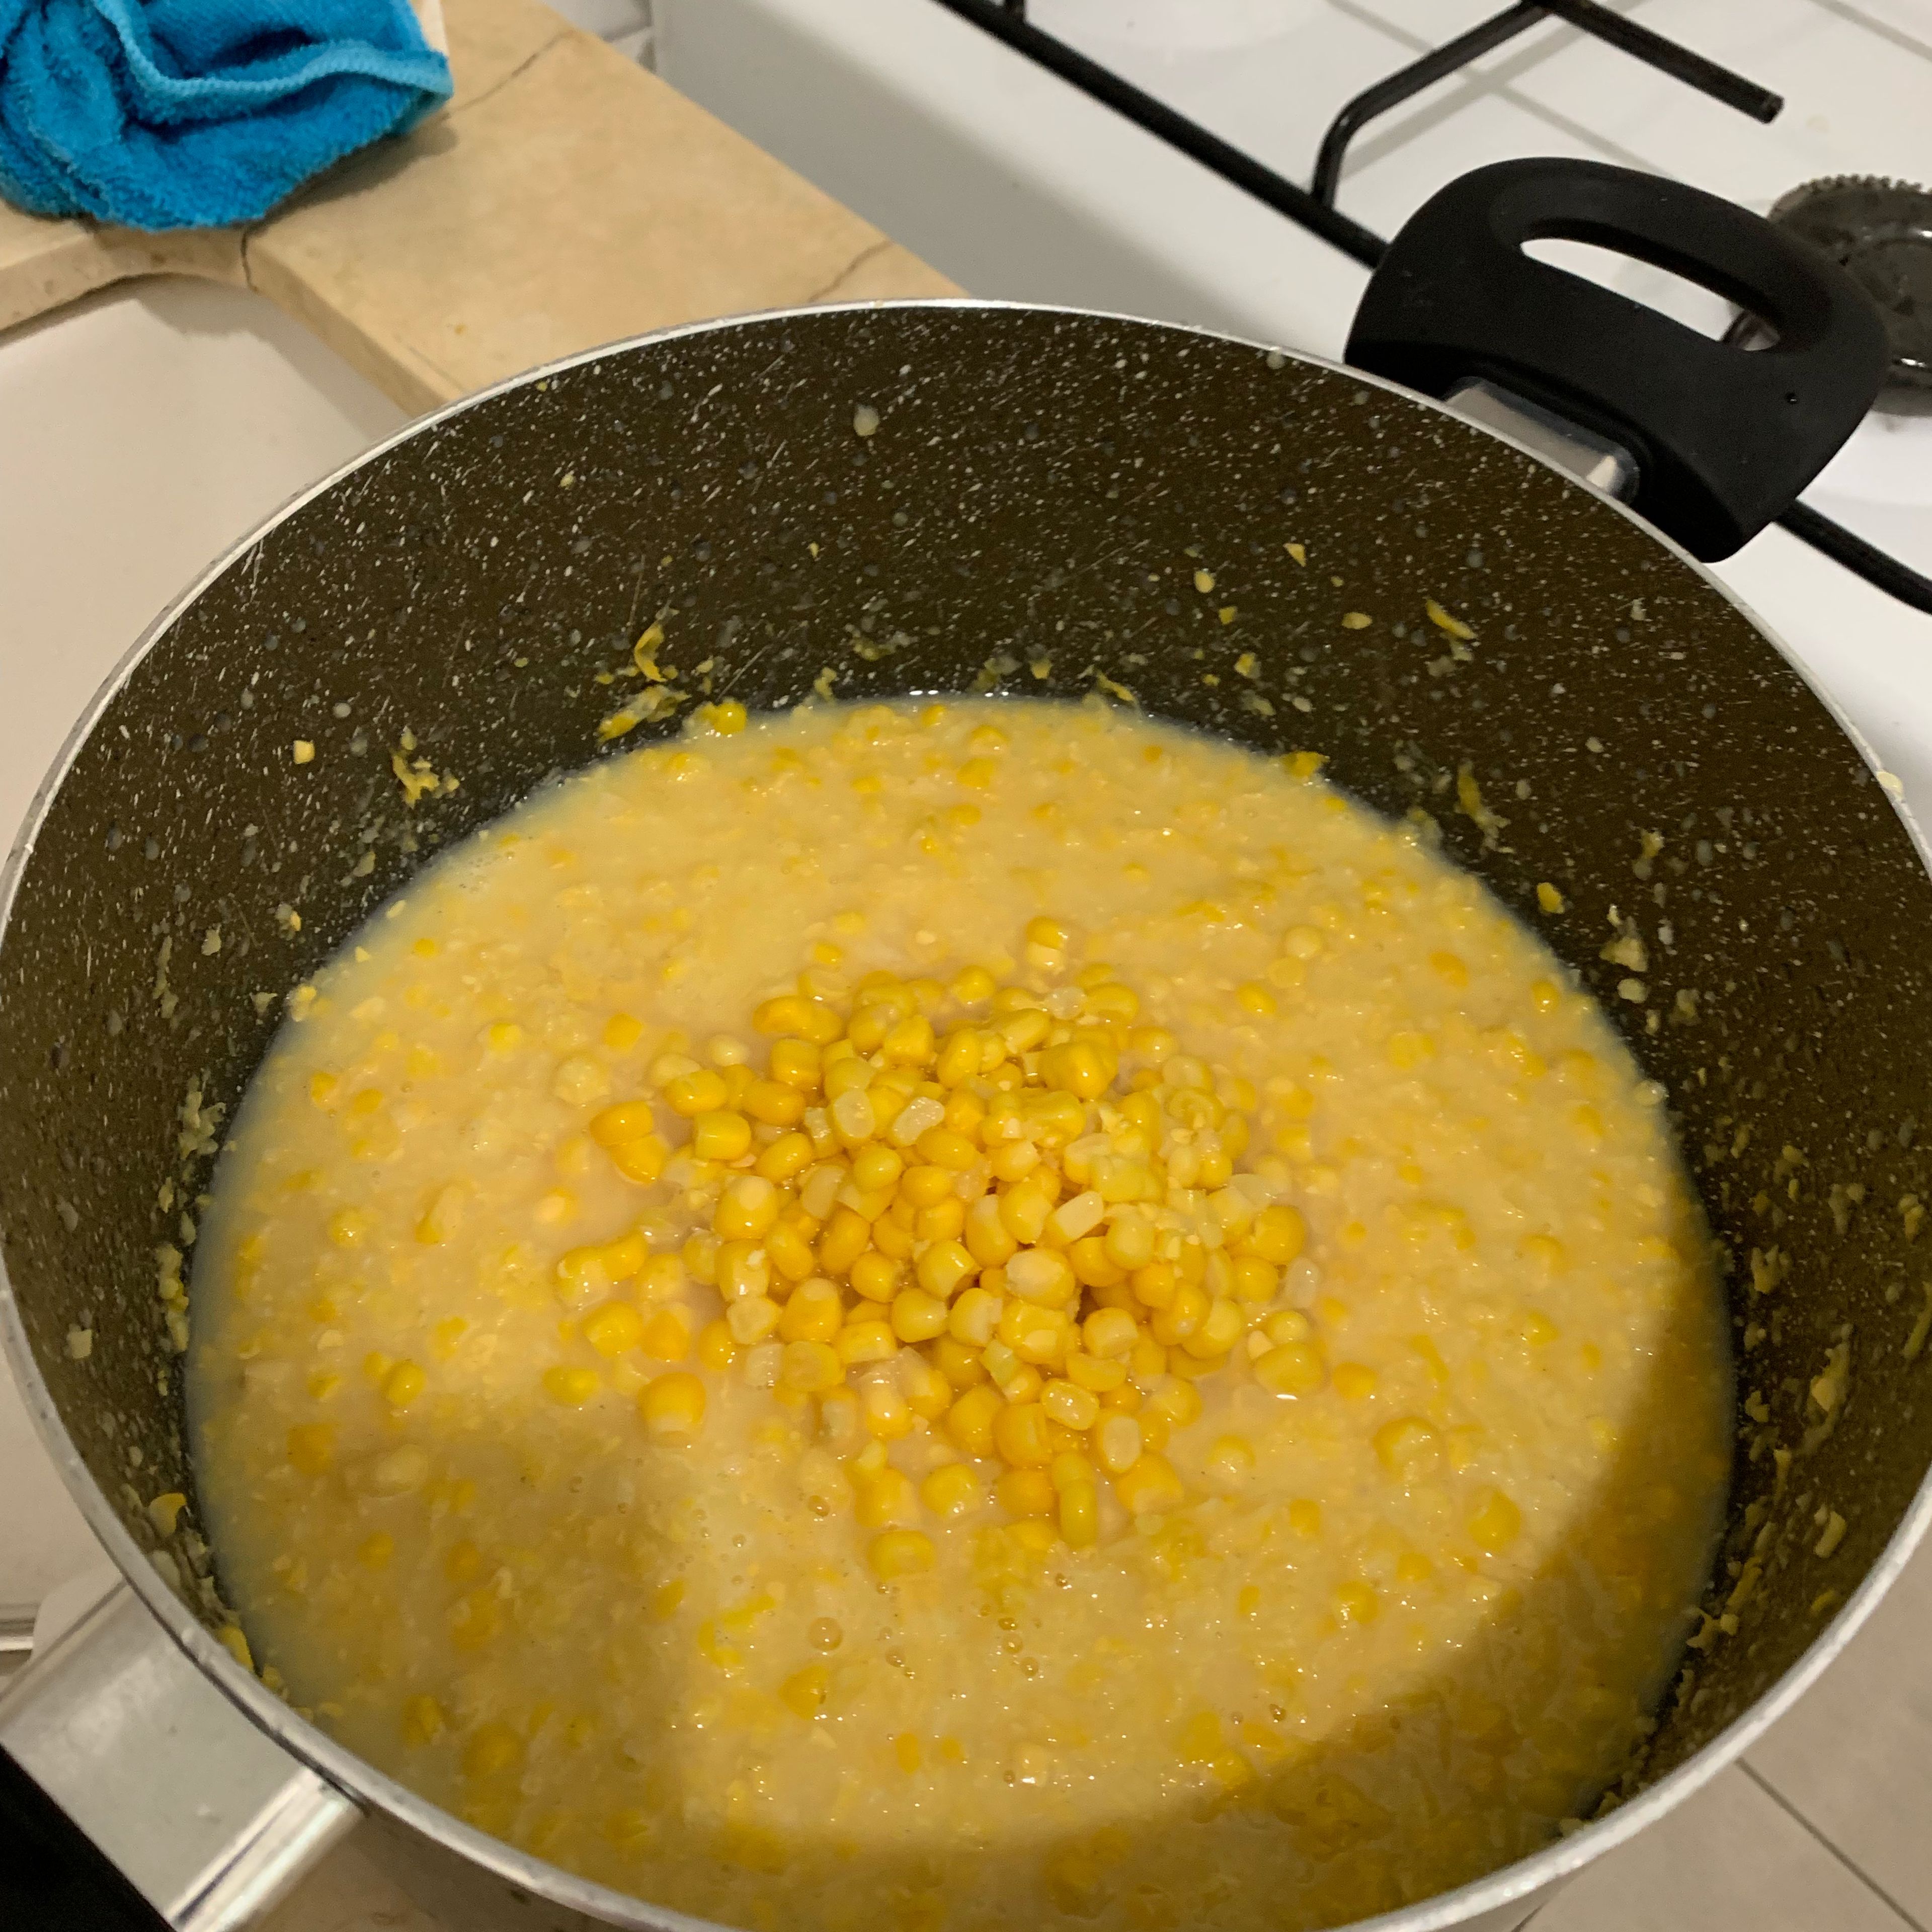 Add the rest of the corn 